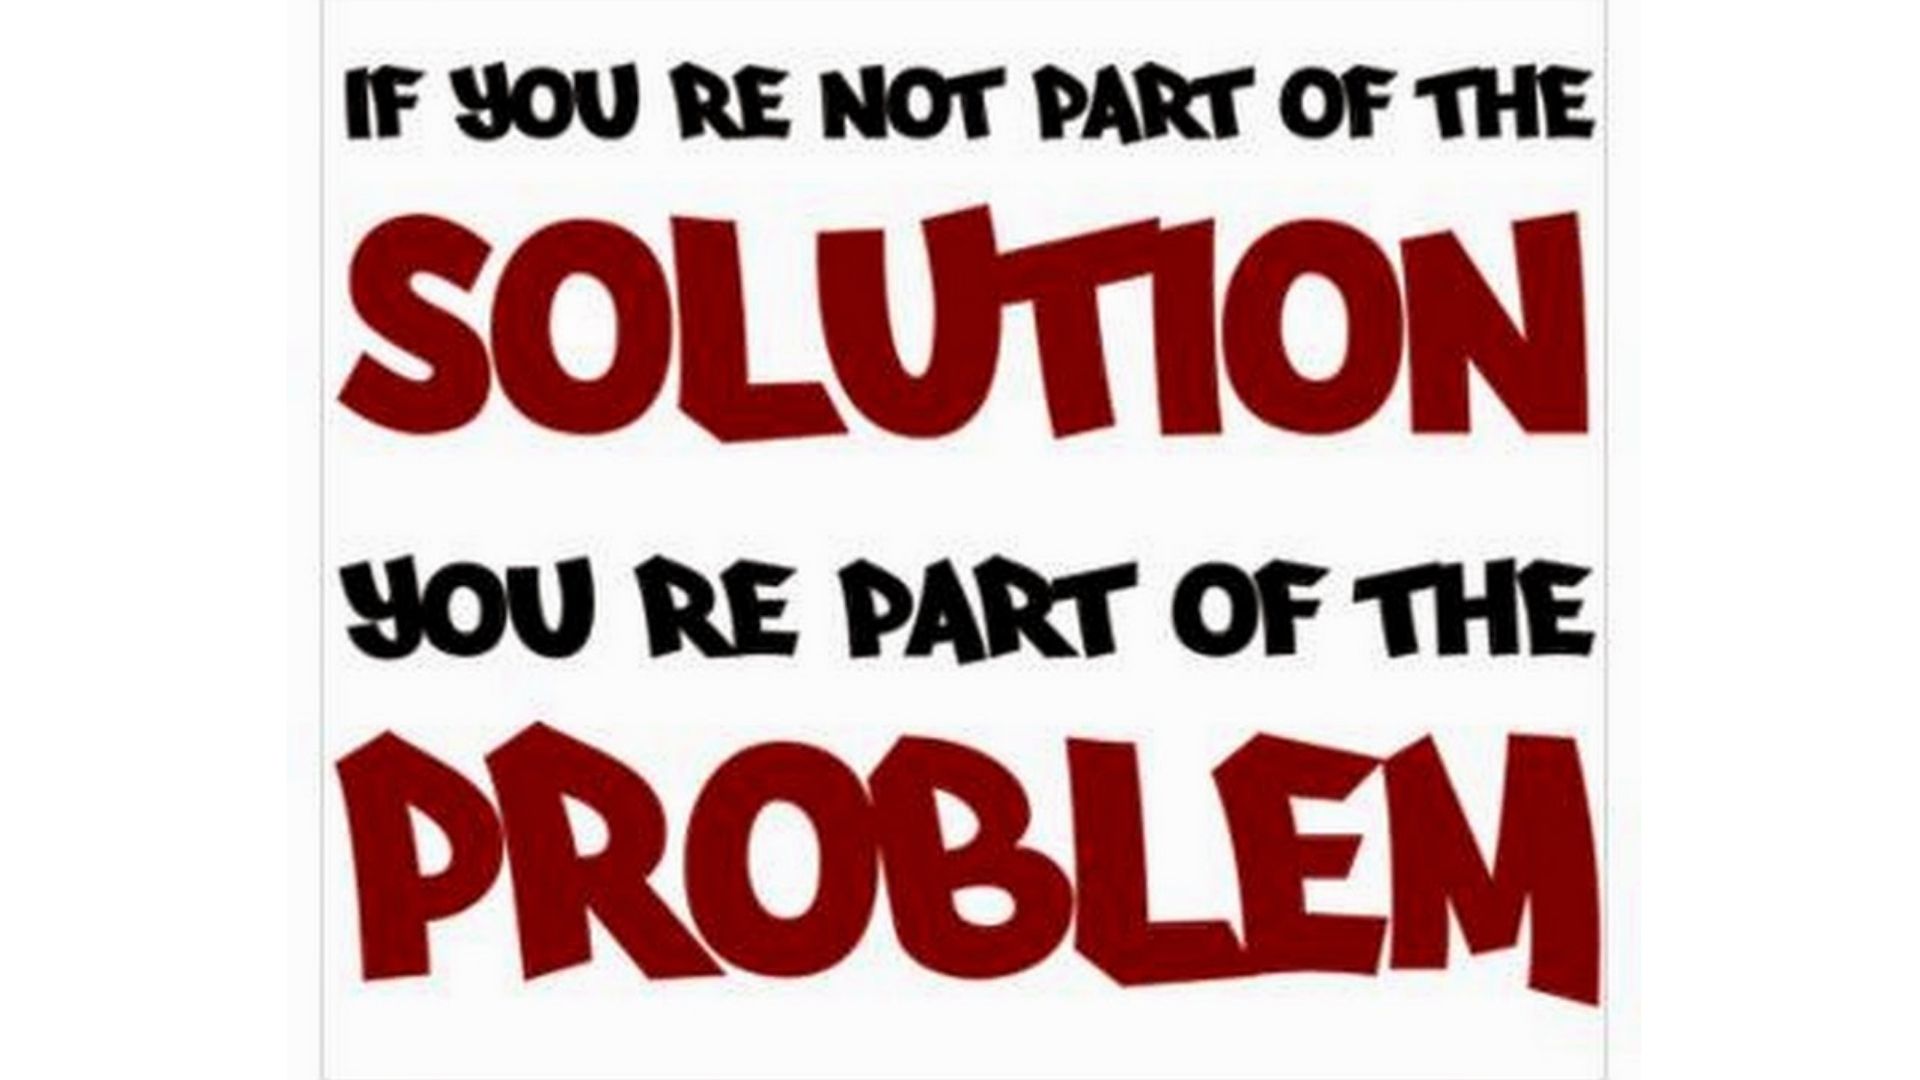 The Problem Could Be You